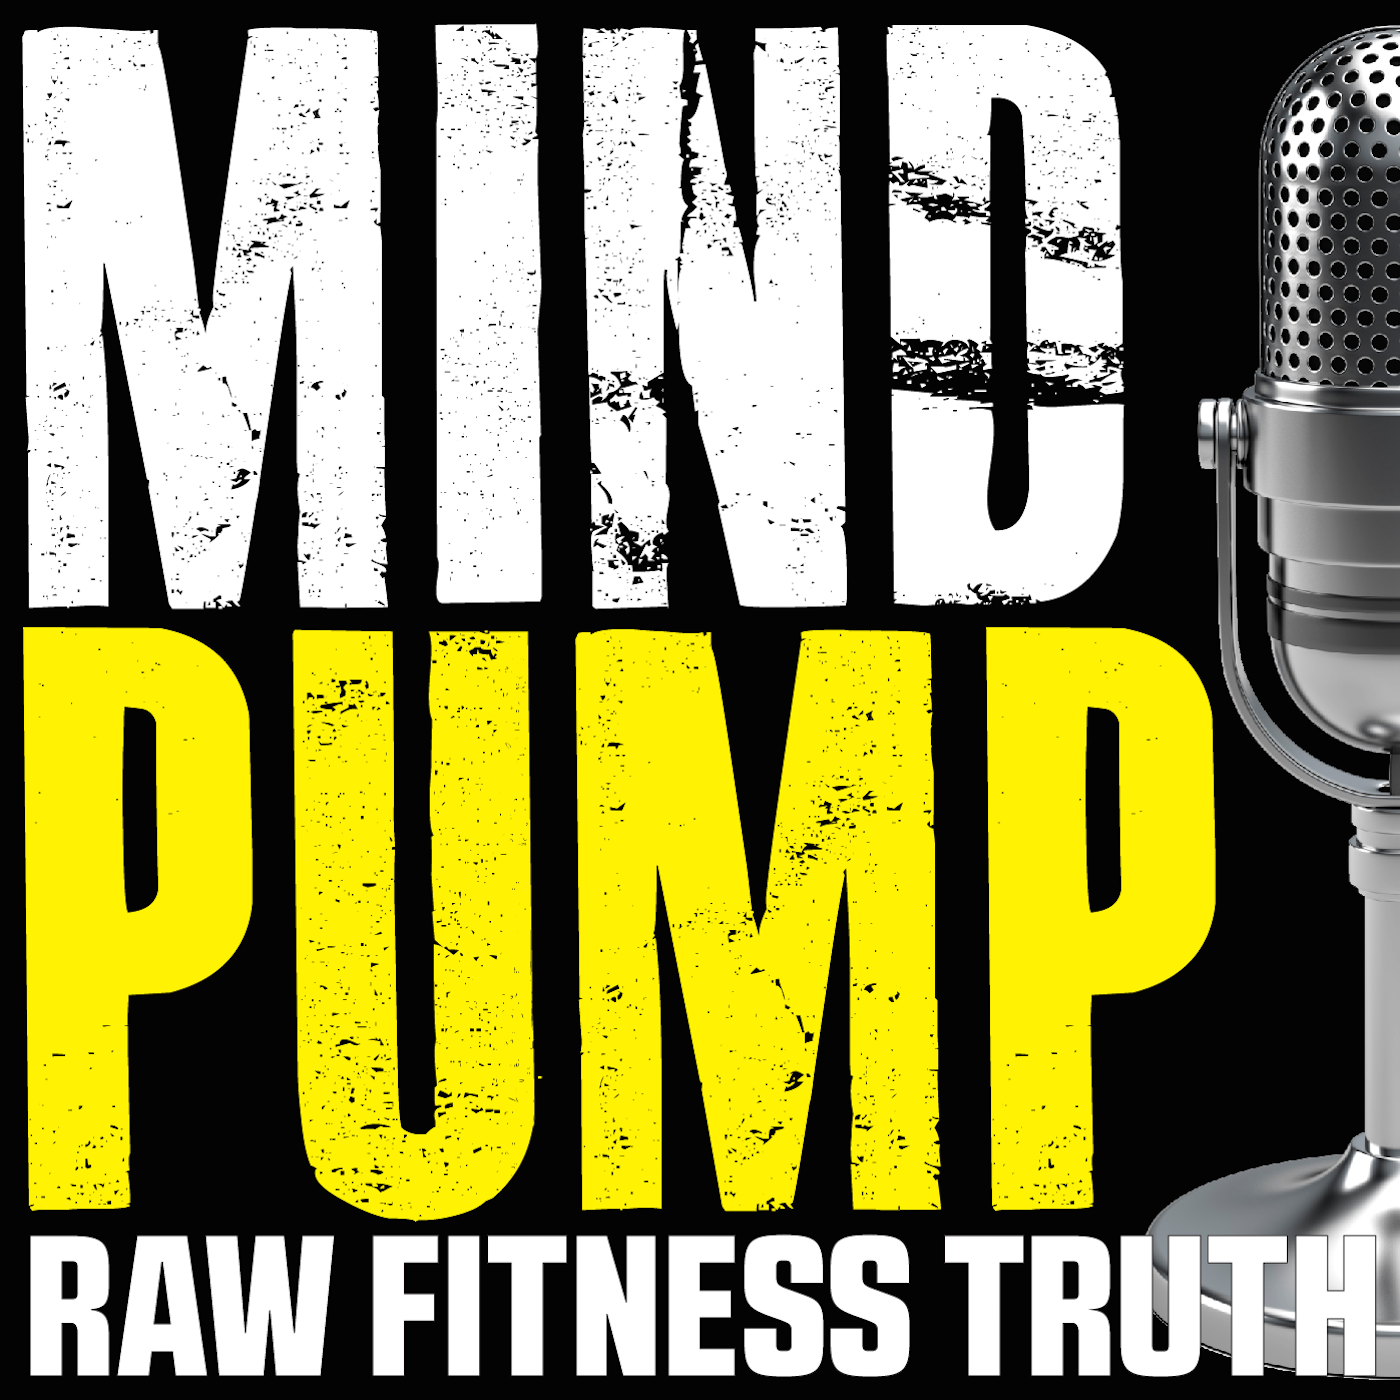 308: Training Men Vs. Women, Tracking Food Vs. Eating Mindfully, Intermittent Fasting On Workout Days & MORE